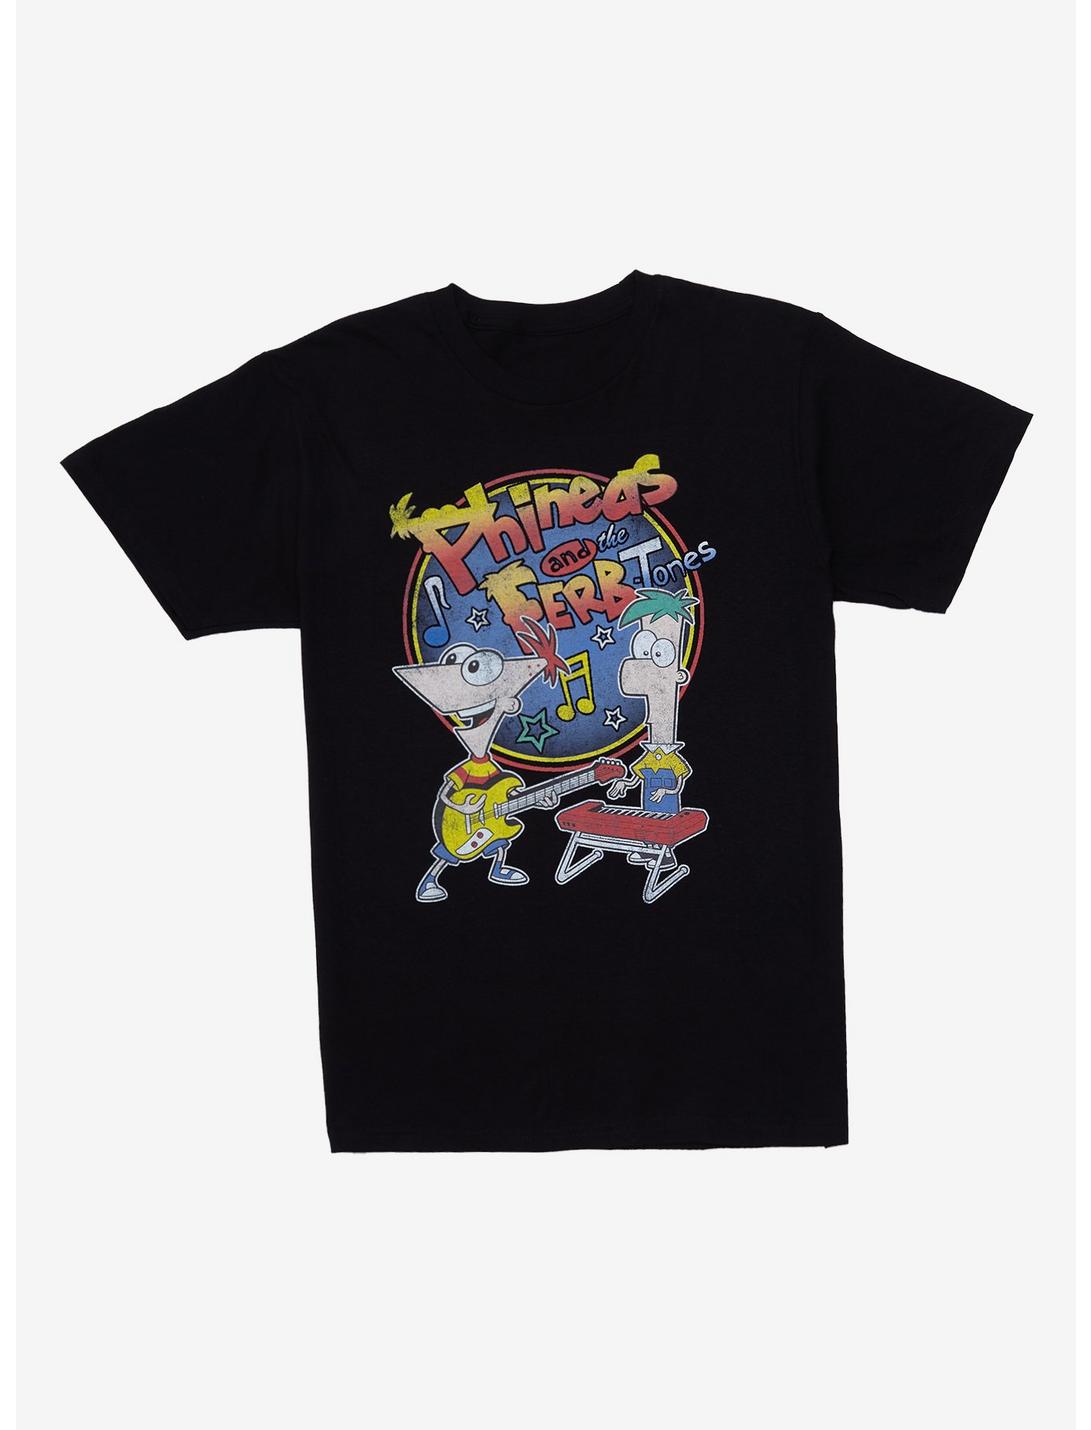 Disney Phineas and Ferb Phineas and the Ferb-Tones T-Shirt - BoxLunch Exclusive, BLACK, hi-res